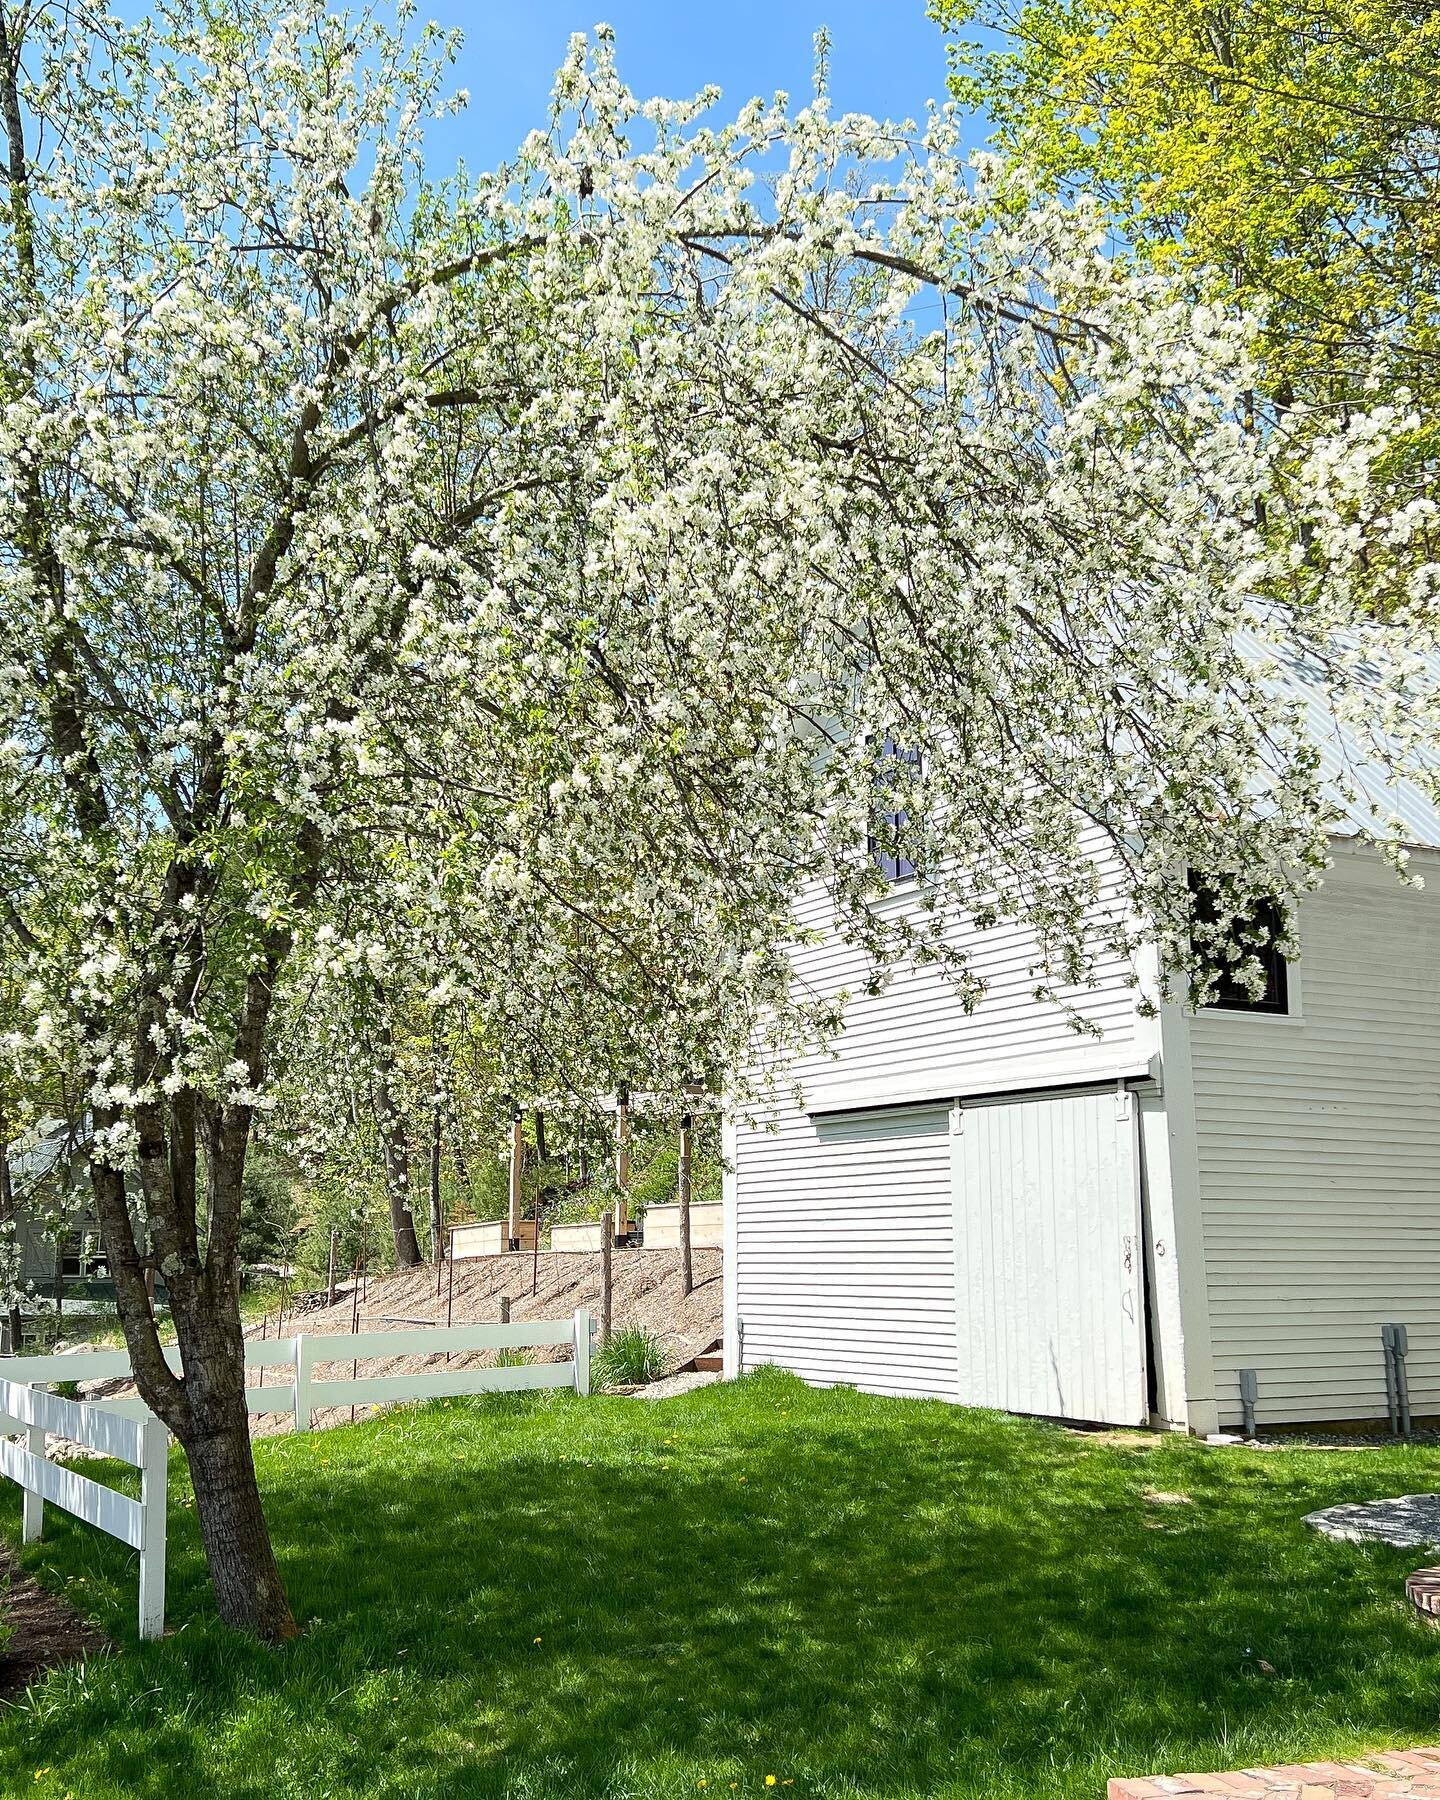 The previous owners planted this crab apple tree&hellip;each year, around this time, it blooms the most beautiful white flowers and the bees buzz like crazy pollinating the blossoms&hellip;we are lucky to reap the benefits of their hard work 🐝
.
.

